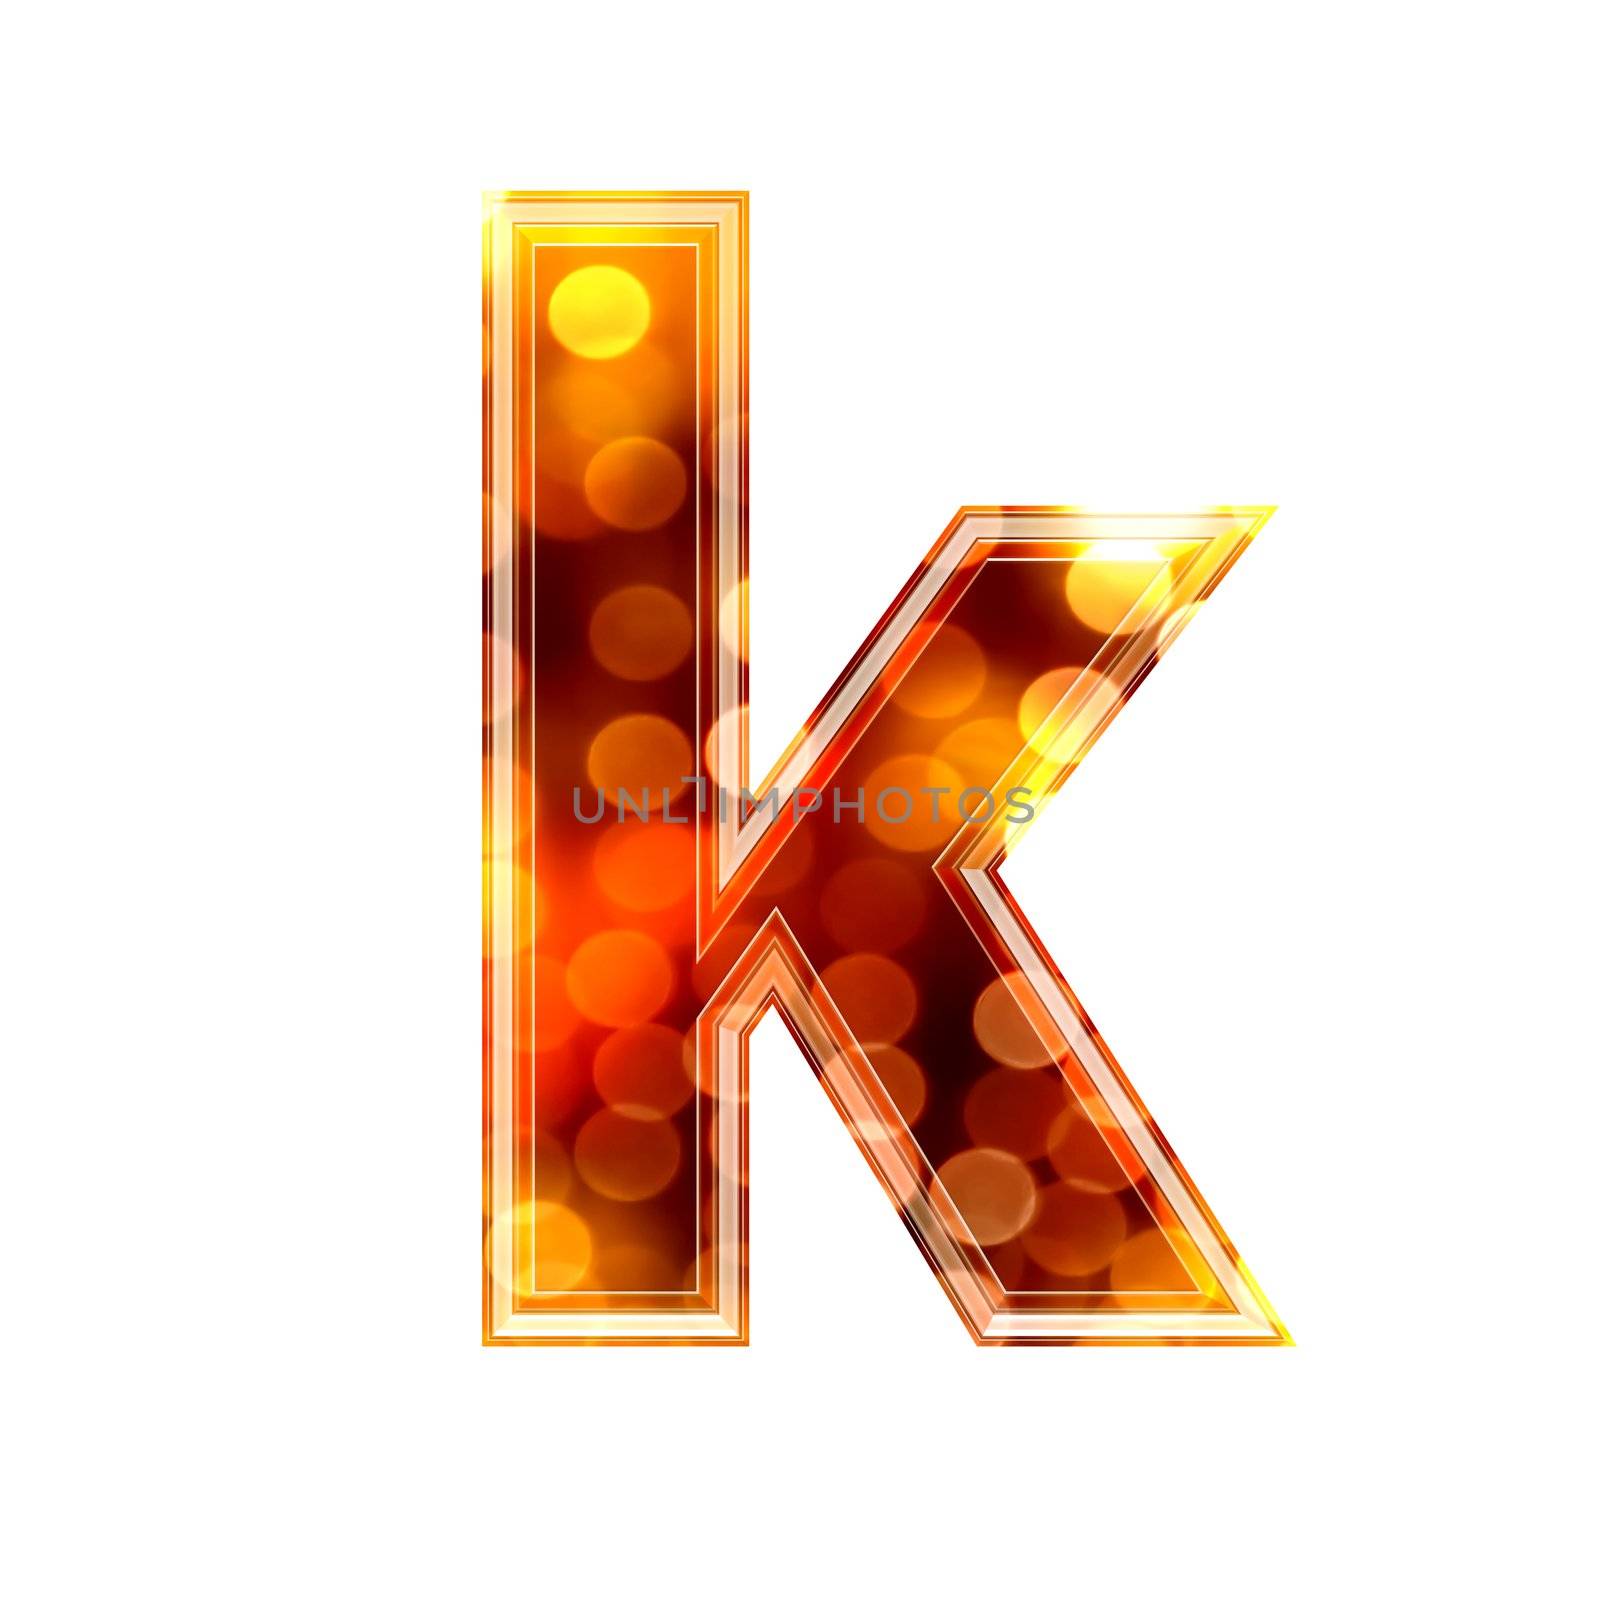 3d letter with glowing lights texture - k by chrisroll